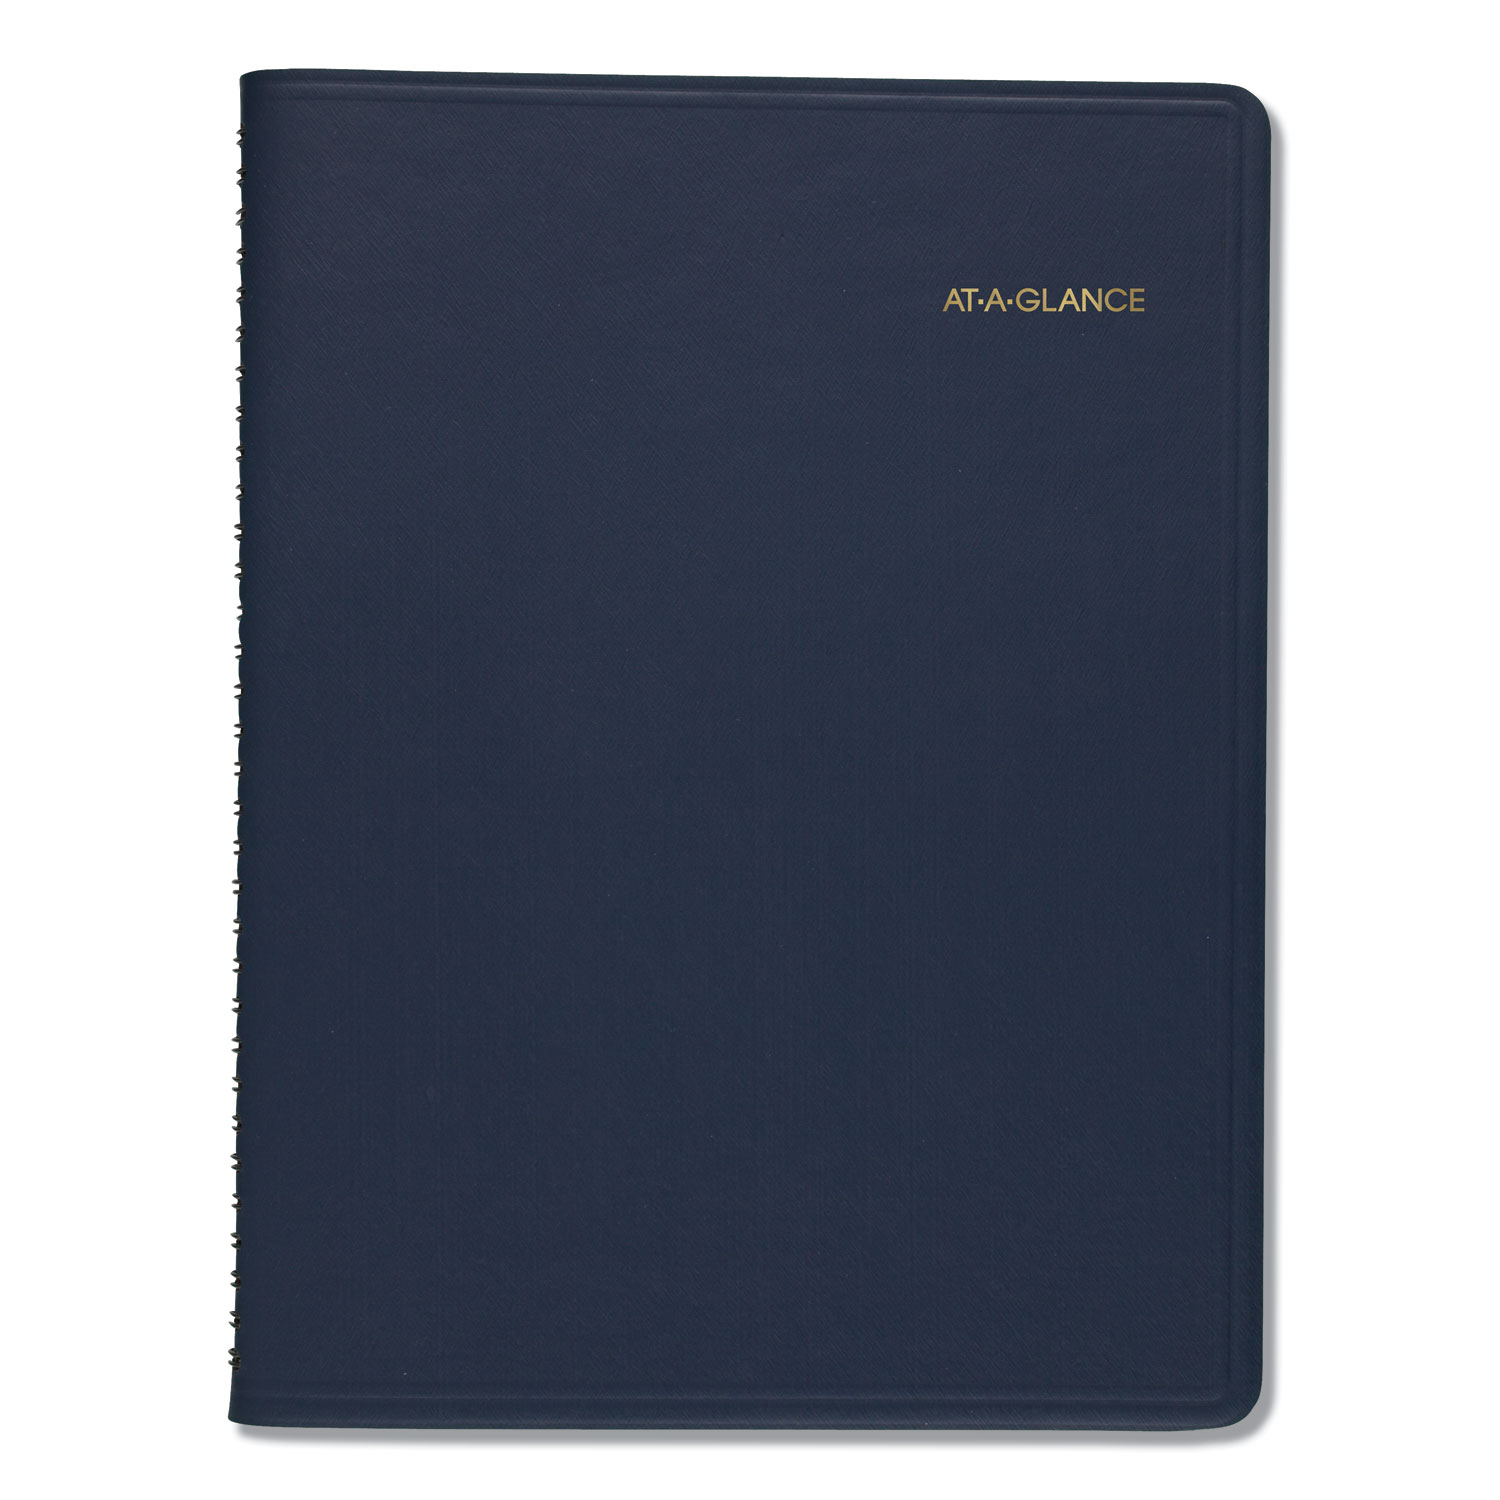  AT-A-GLANCE 7026020 Monthly Planner, 11 x 8 7/8, Navy, 2020-2021 (AAG7026020) 